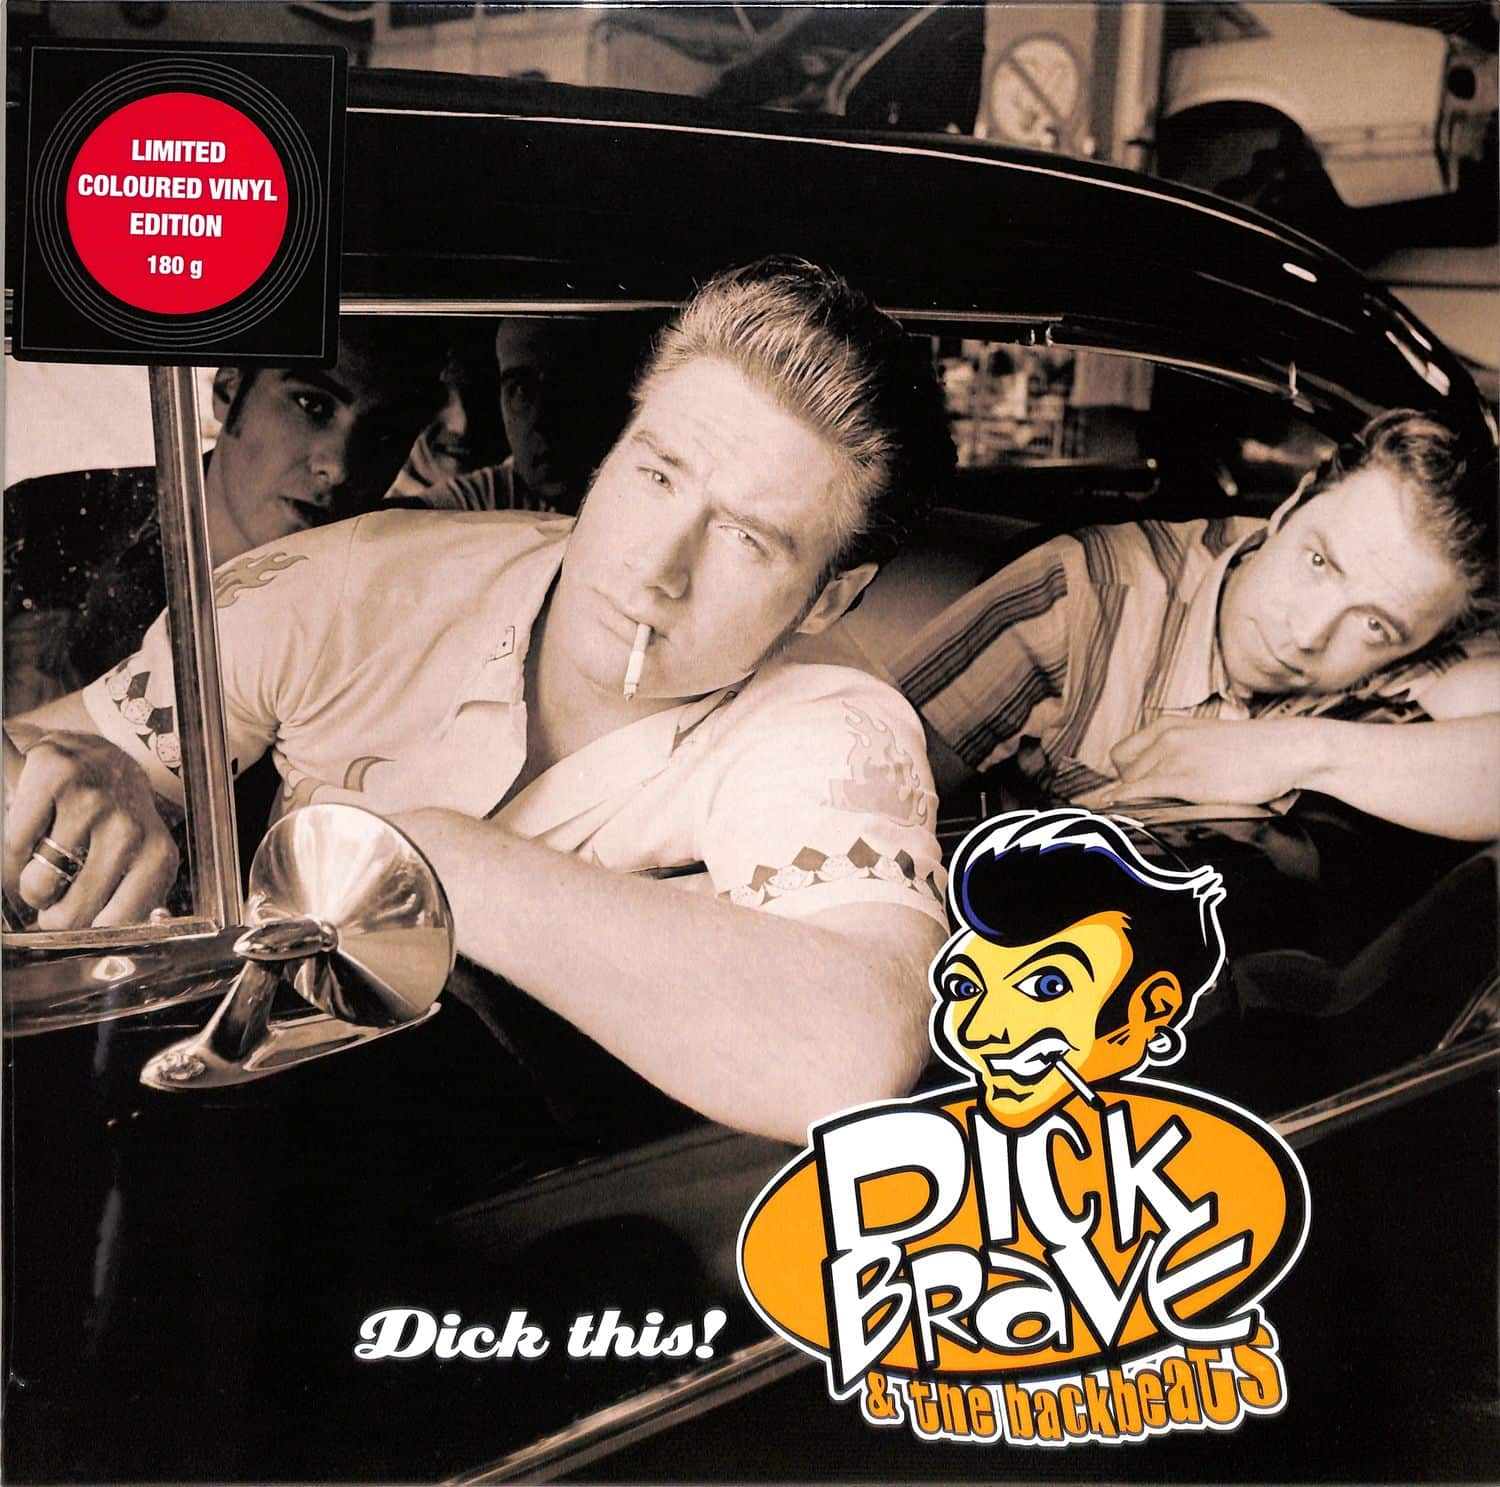 Dick Brave & The Backbeats - DICK THIS! 